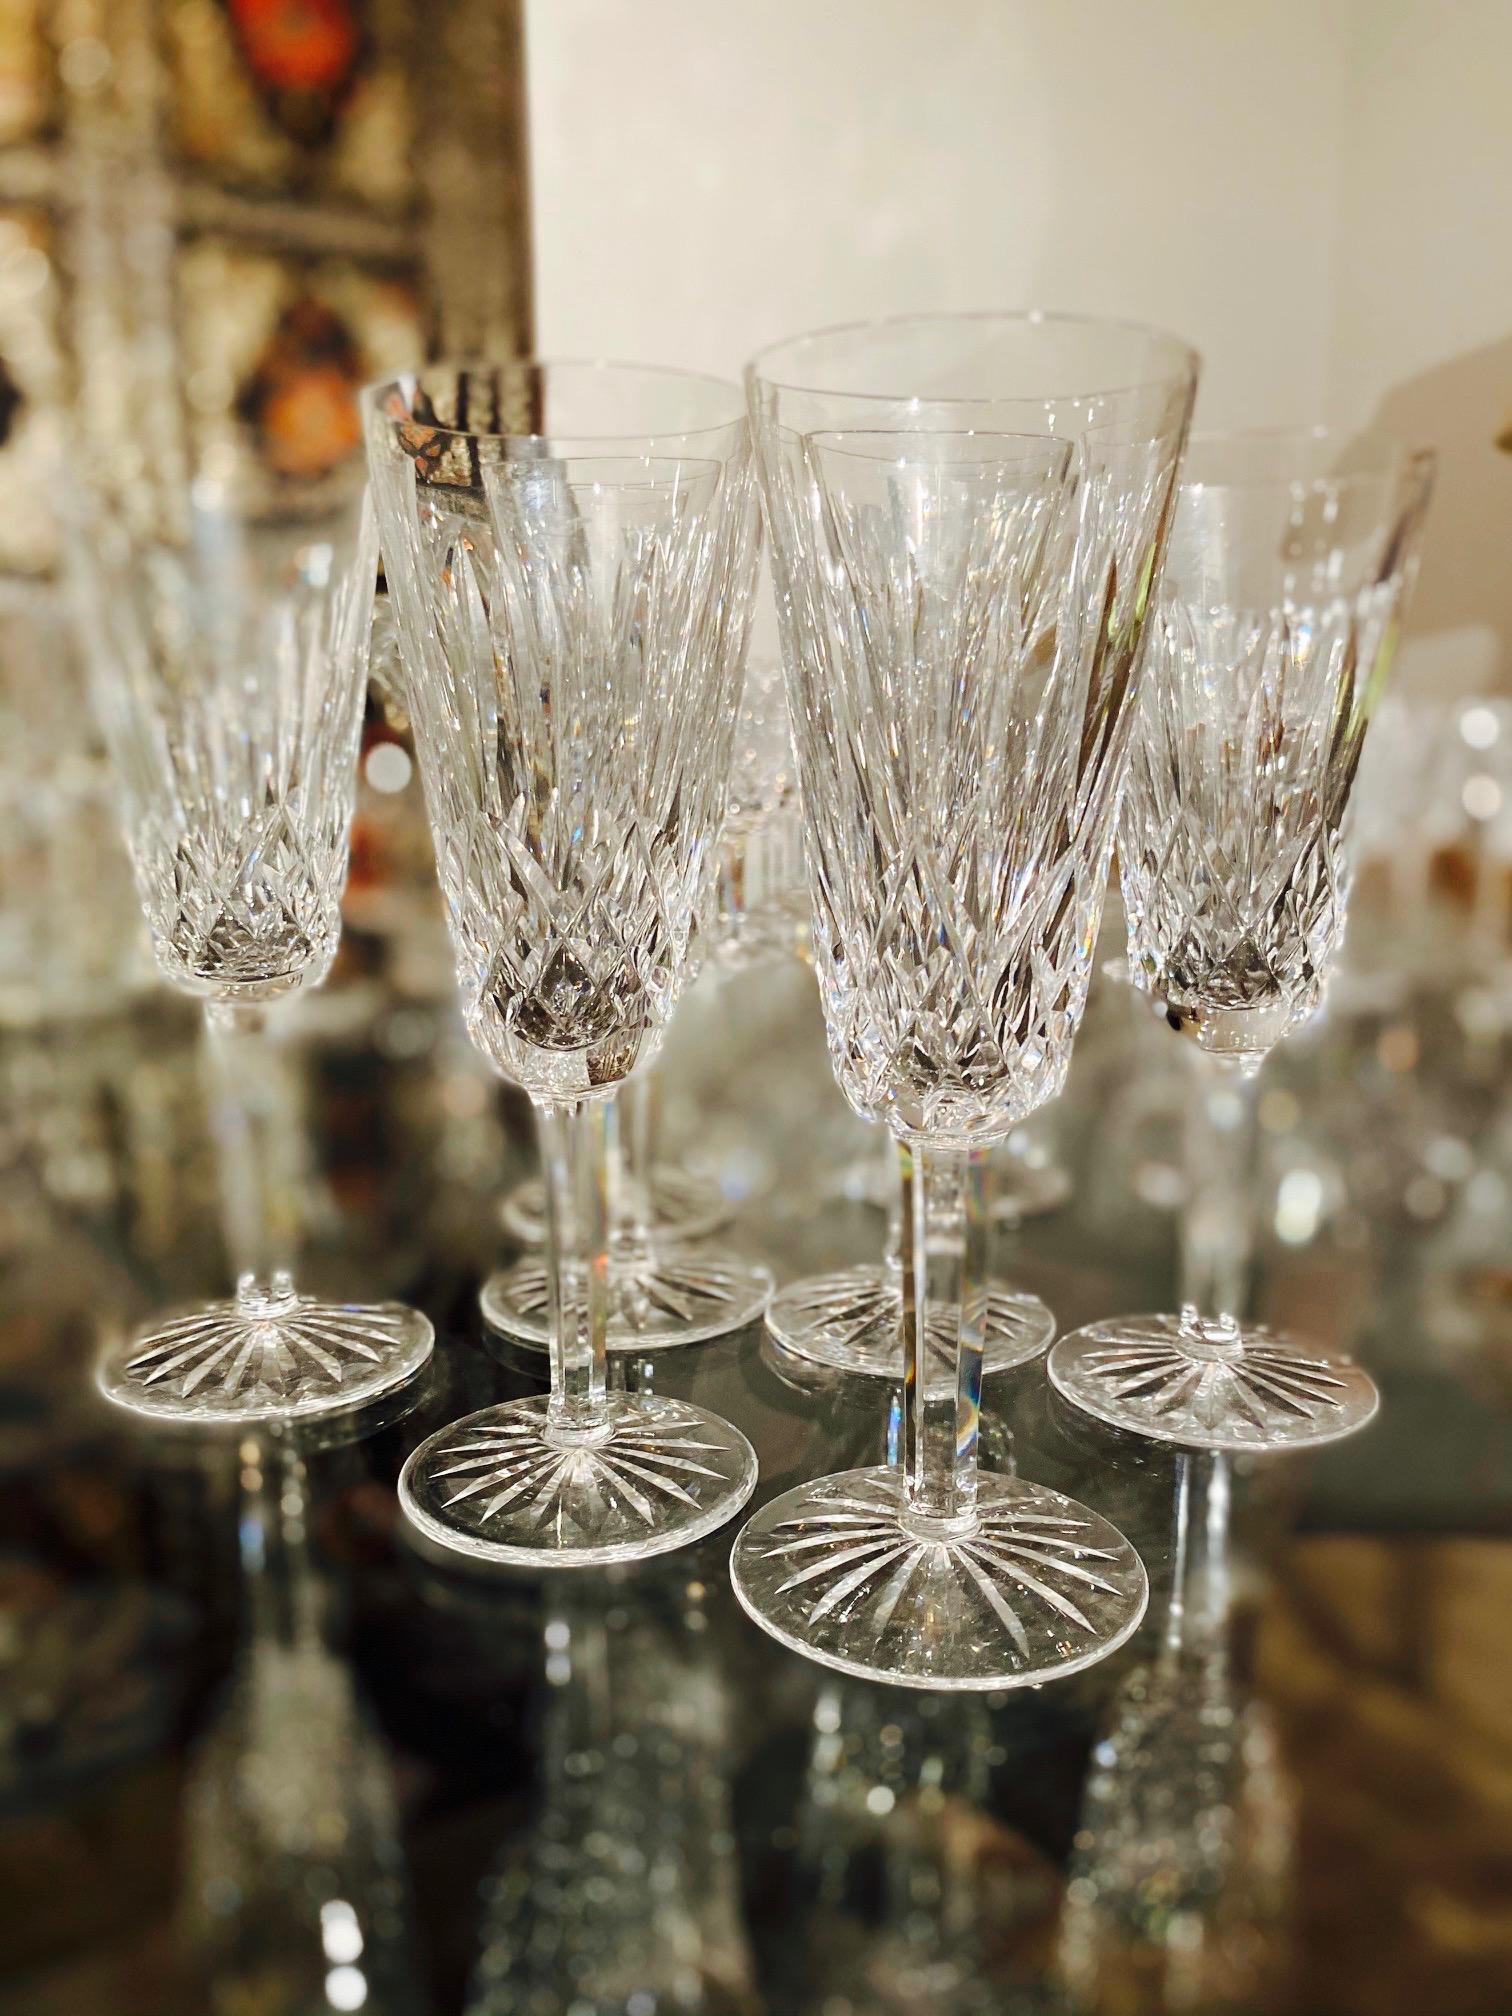 Set of eight luxury crystal champagne flutes from Waterford Crystal, circa 1995. The Lismore Collection is perhaps Waterford's most distinguished design featuring hand blown crystal with the pattern's signature diamond and wedge cuts. First